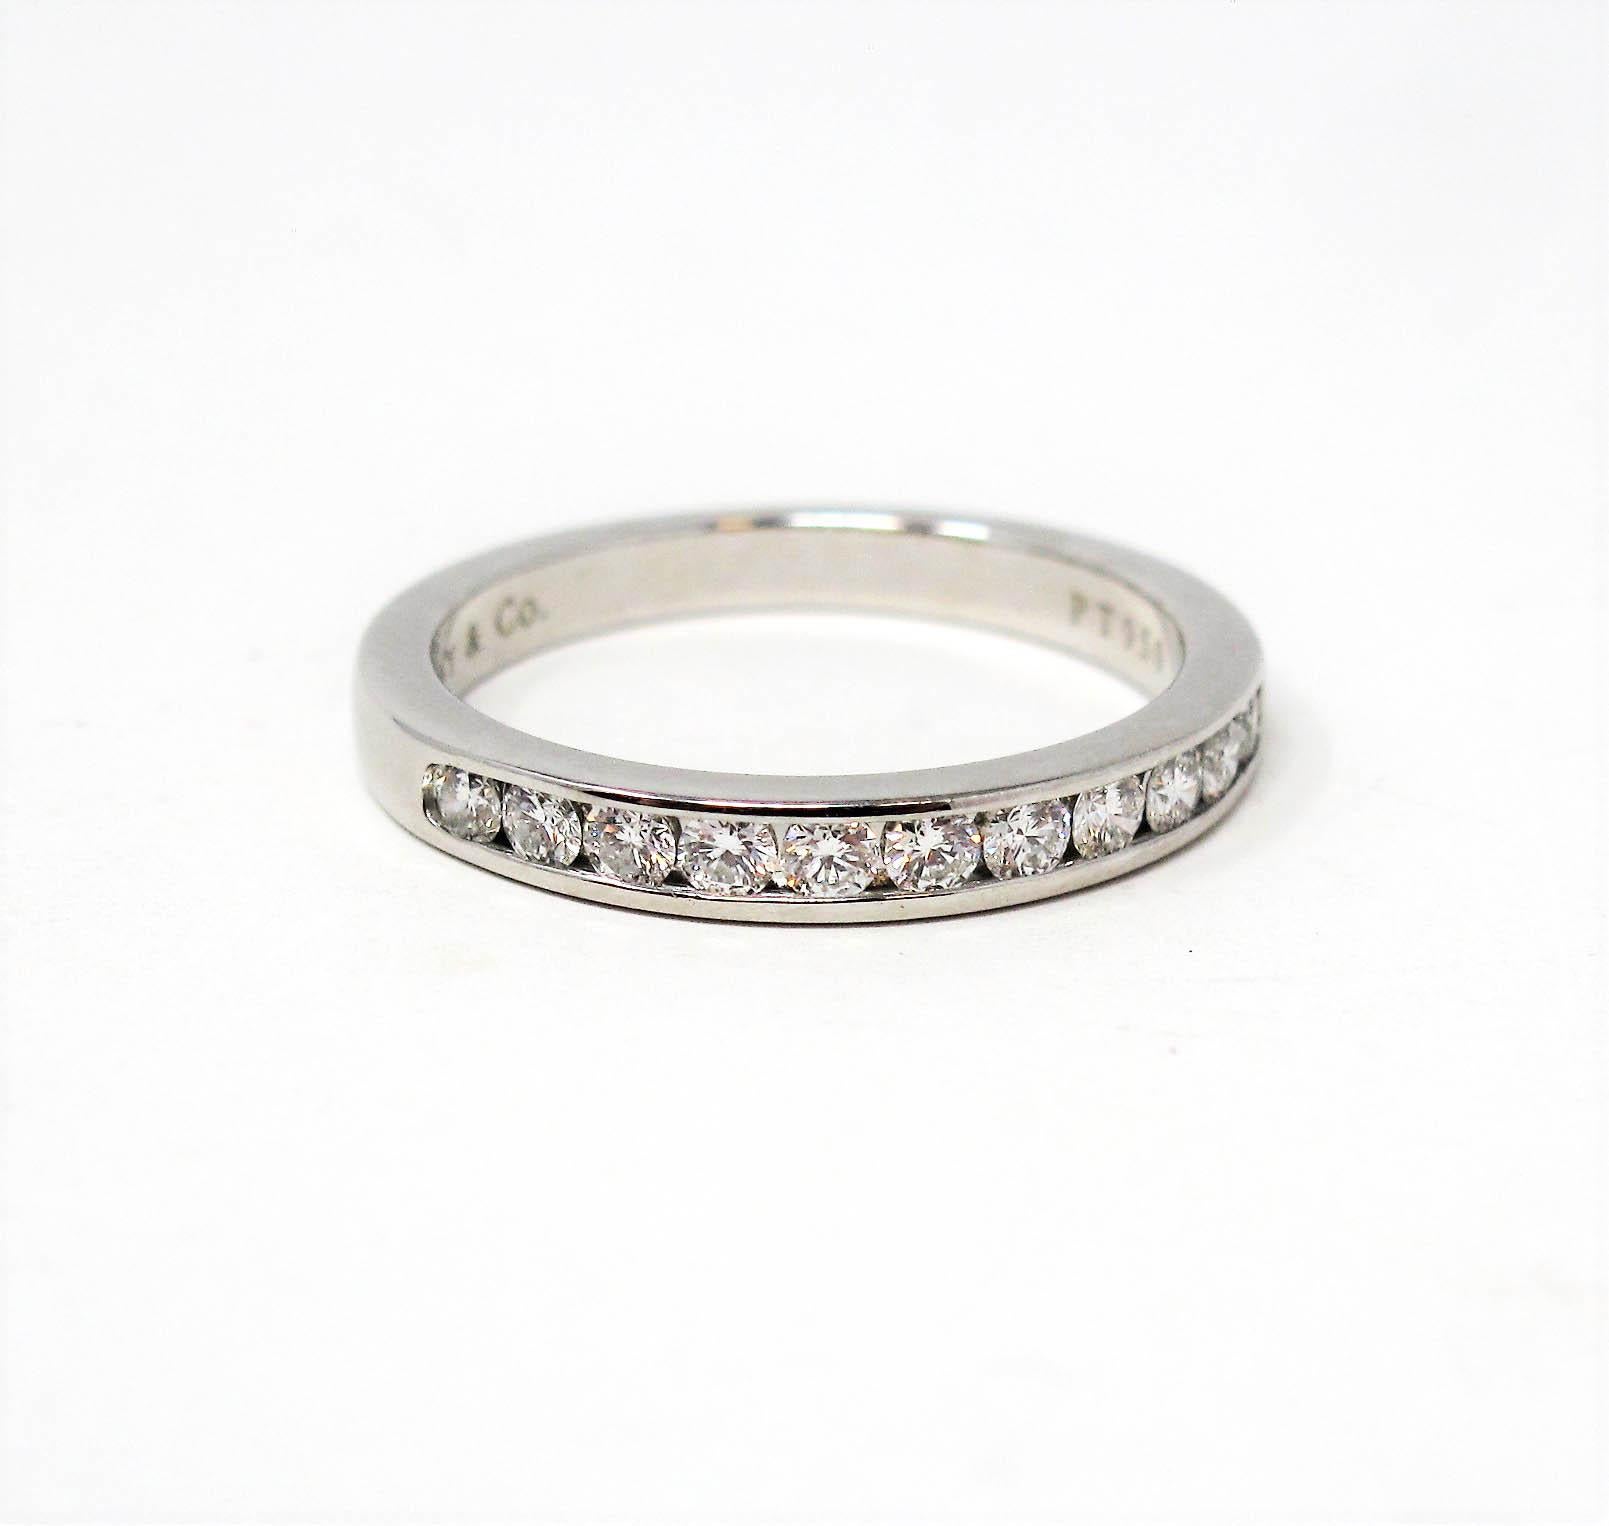 Stunning Tiffany & Co. diamond semi eternity band ring. This timeless beauty features icy white round diamonds channel set in a single elegant row. The sleek polished band has a modern, yet feminine feel. It would be perfect paired with an